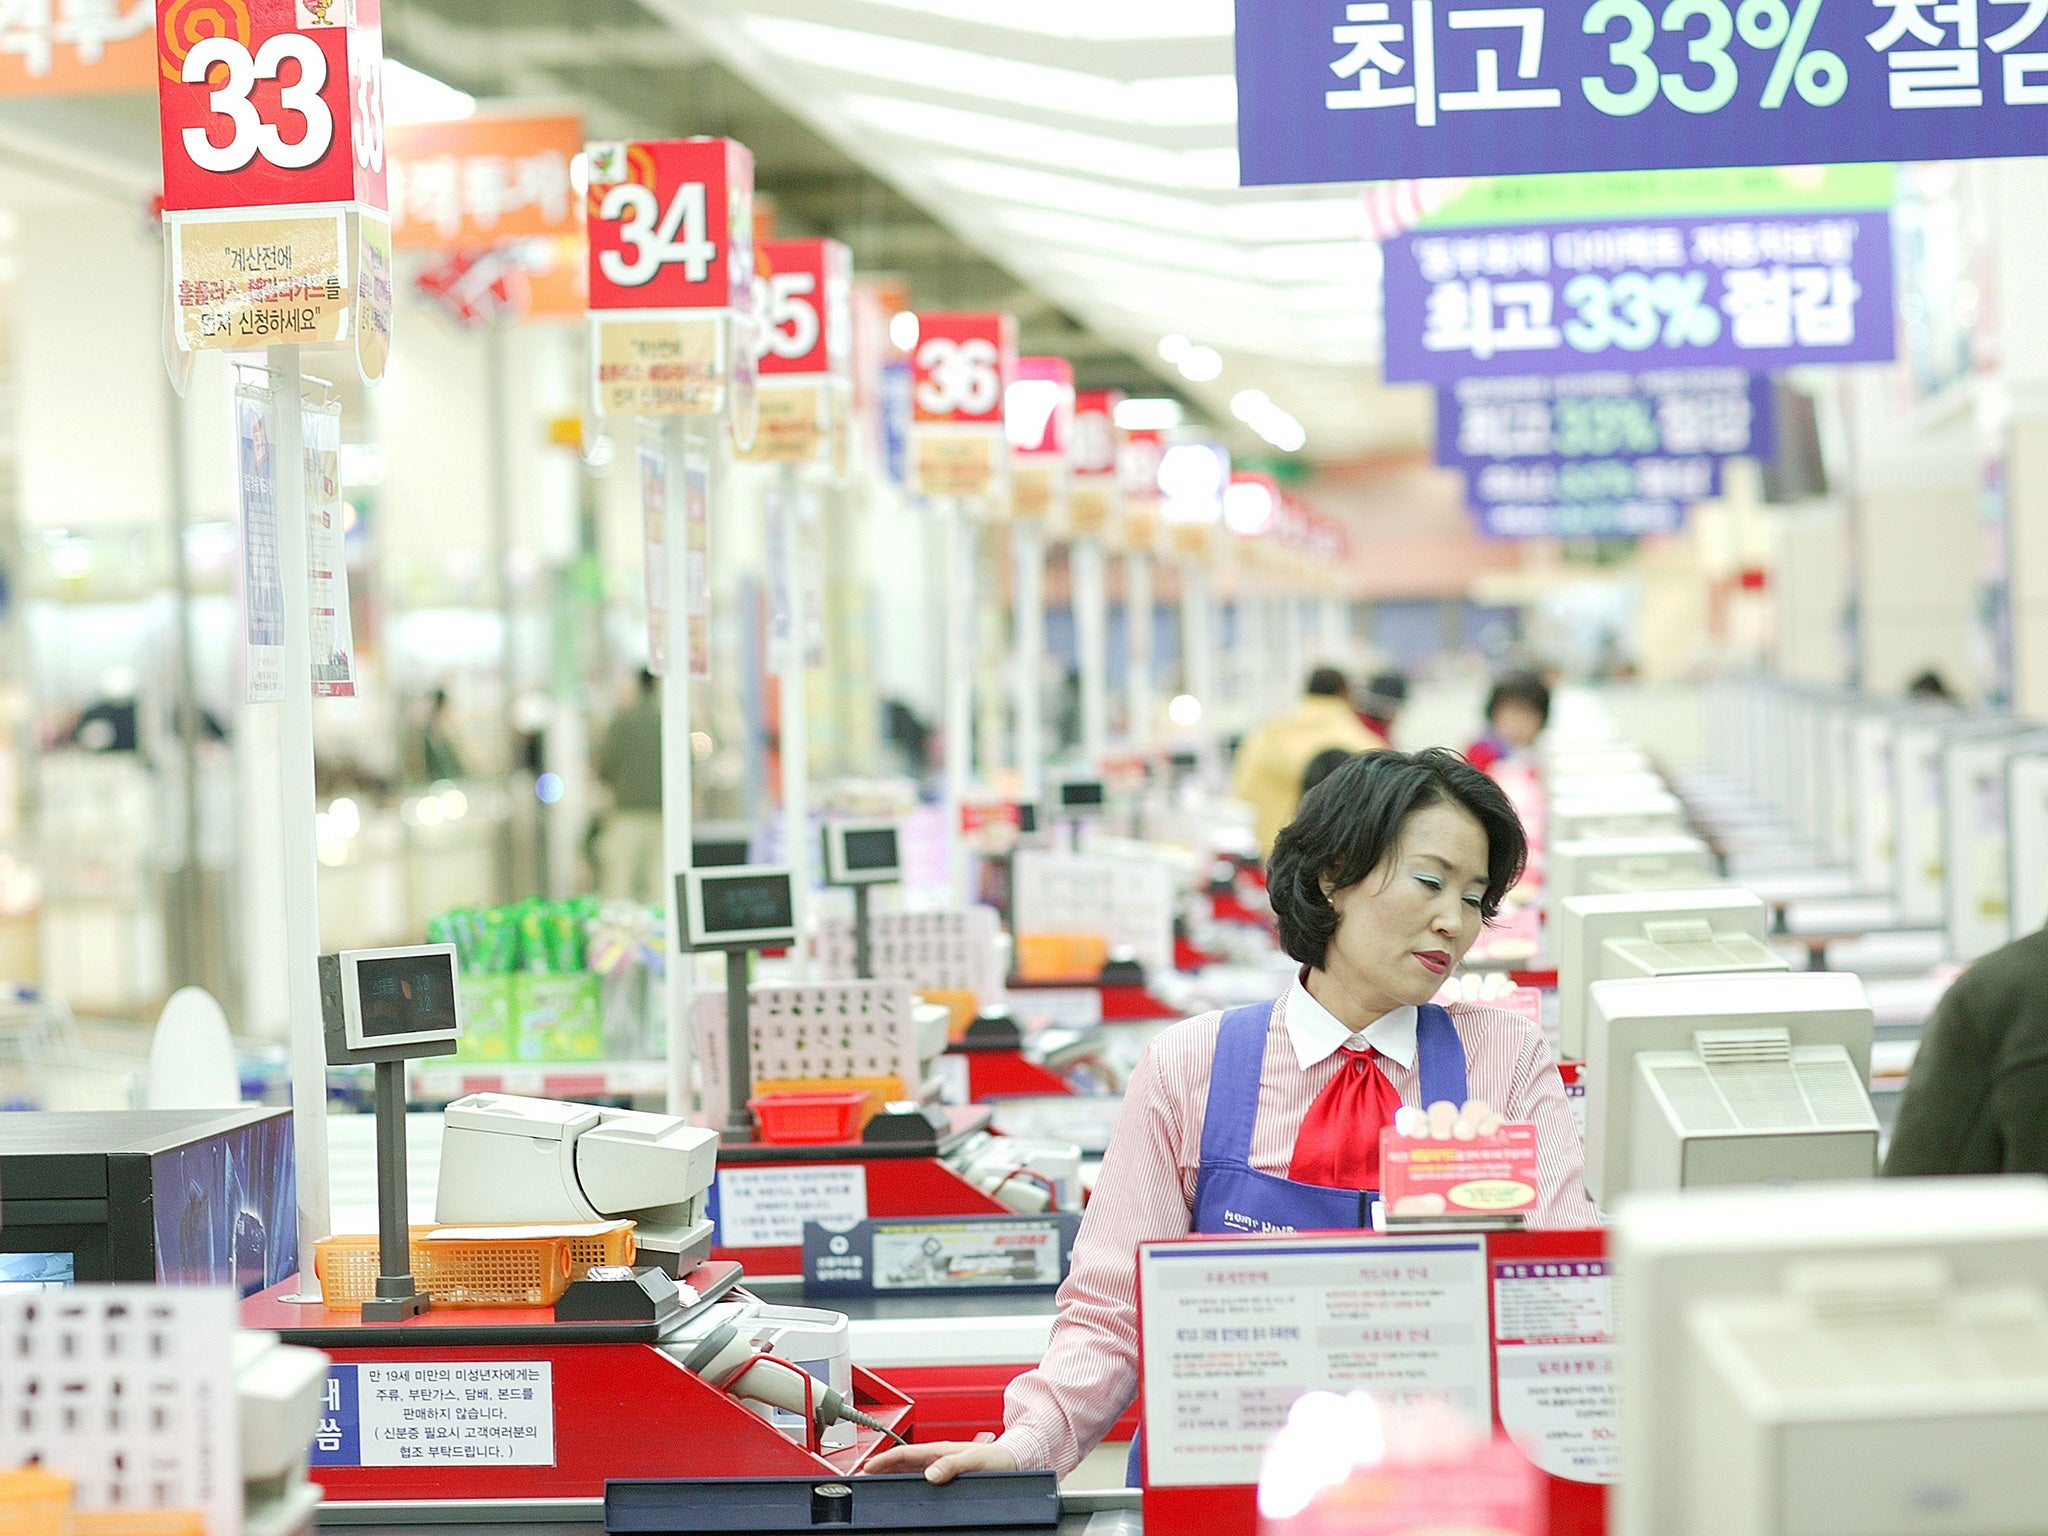 Tesco’s initial hopes for a $6bn sale of its South Korean business are unlikely to be realised